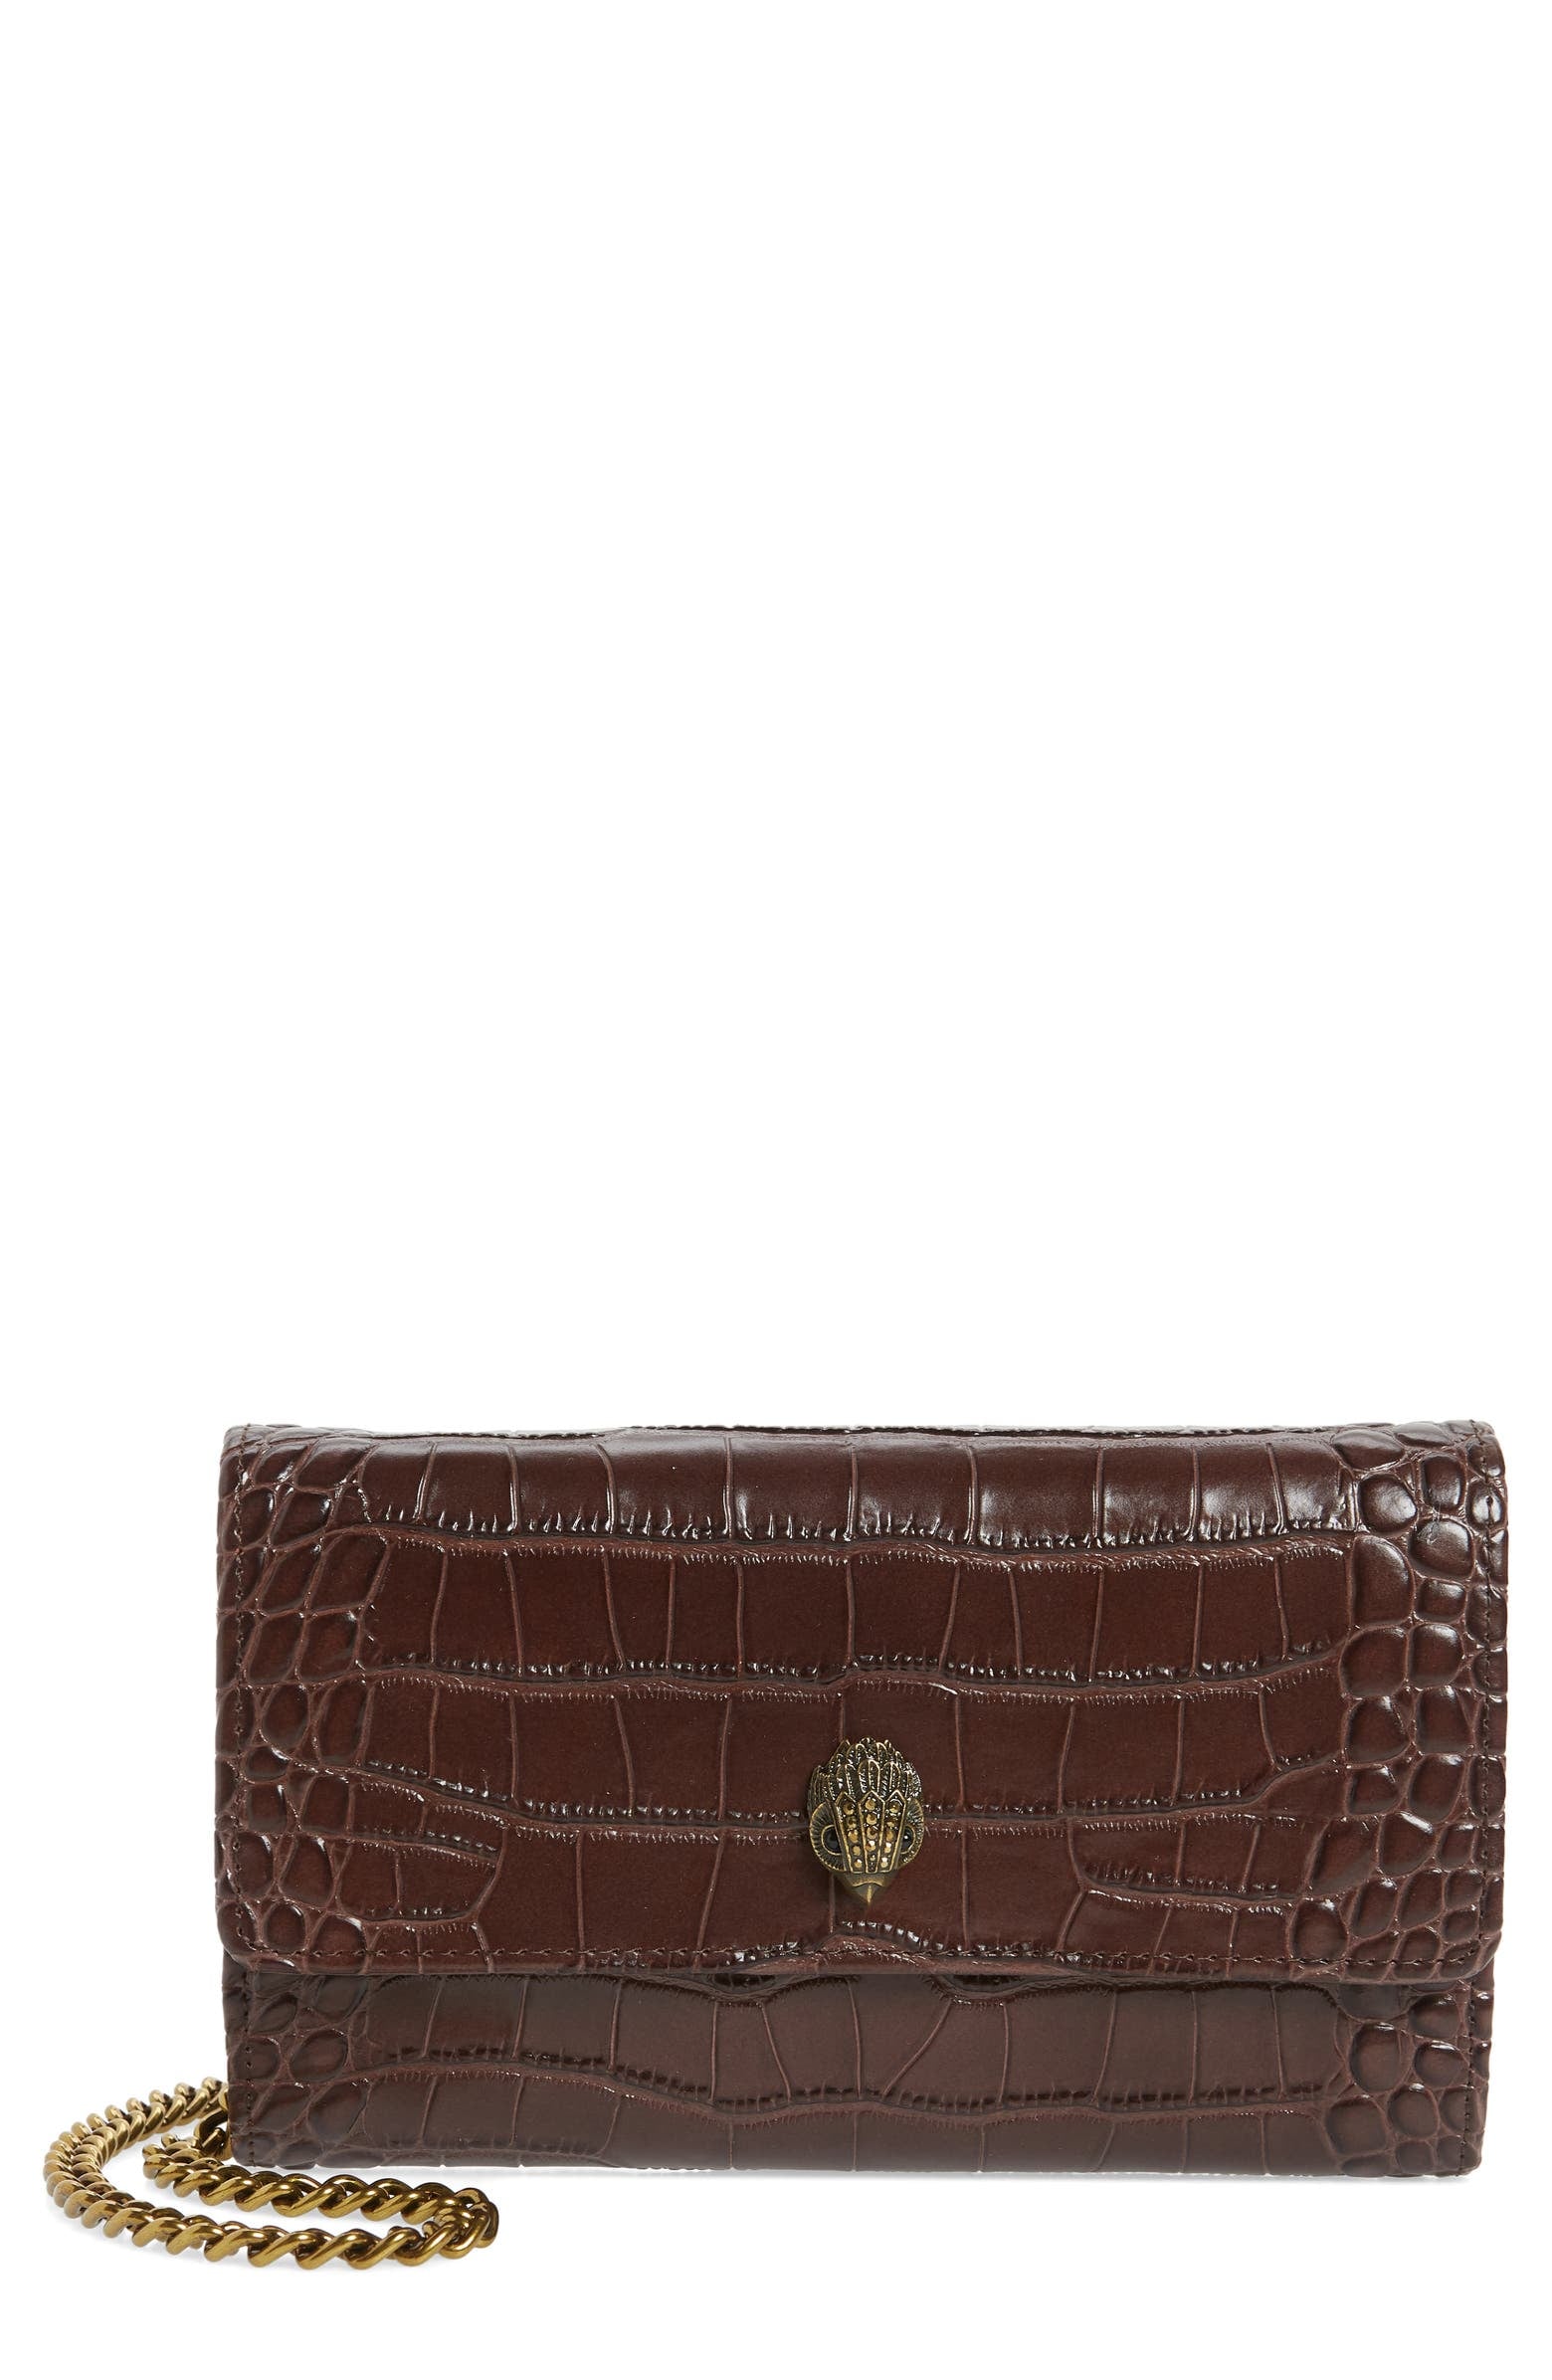 Kurt Geiger Kensington Croc Embossed Leather Wallet | These Nordstrom Deals  Are So Good, Get Them For Yourself — Then Spread the Word | POPSUGAR  Fashion Photo 23